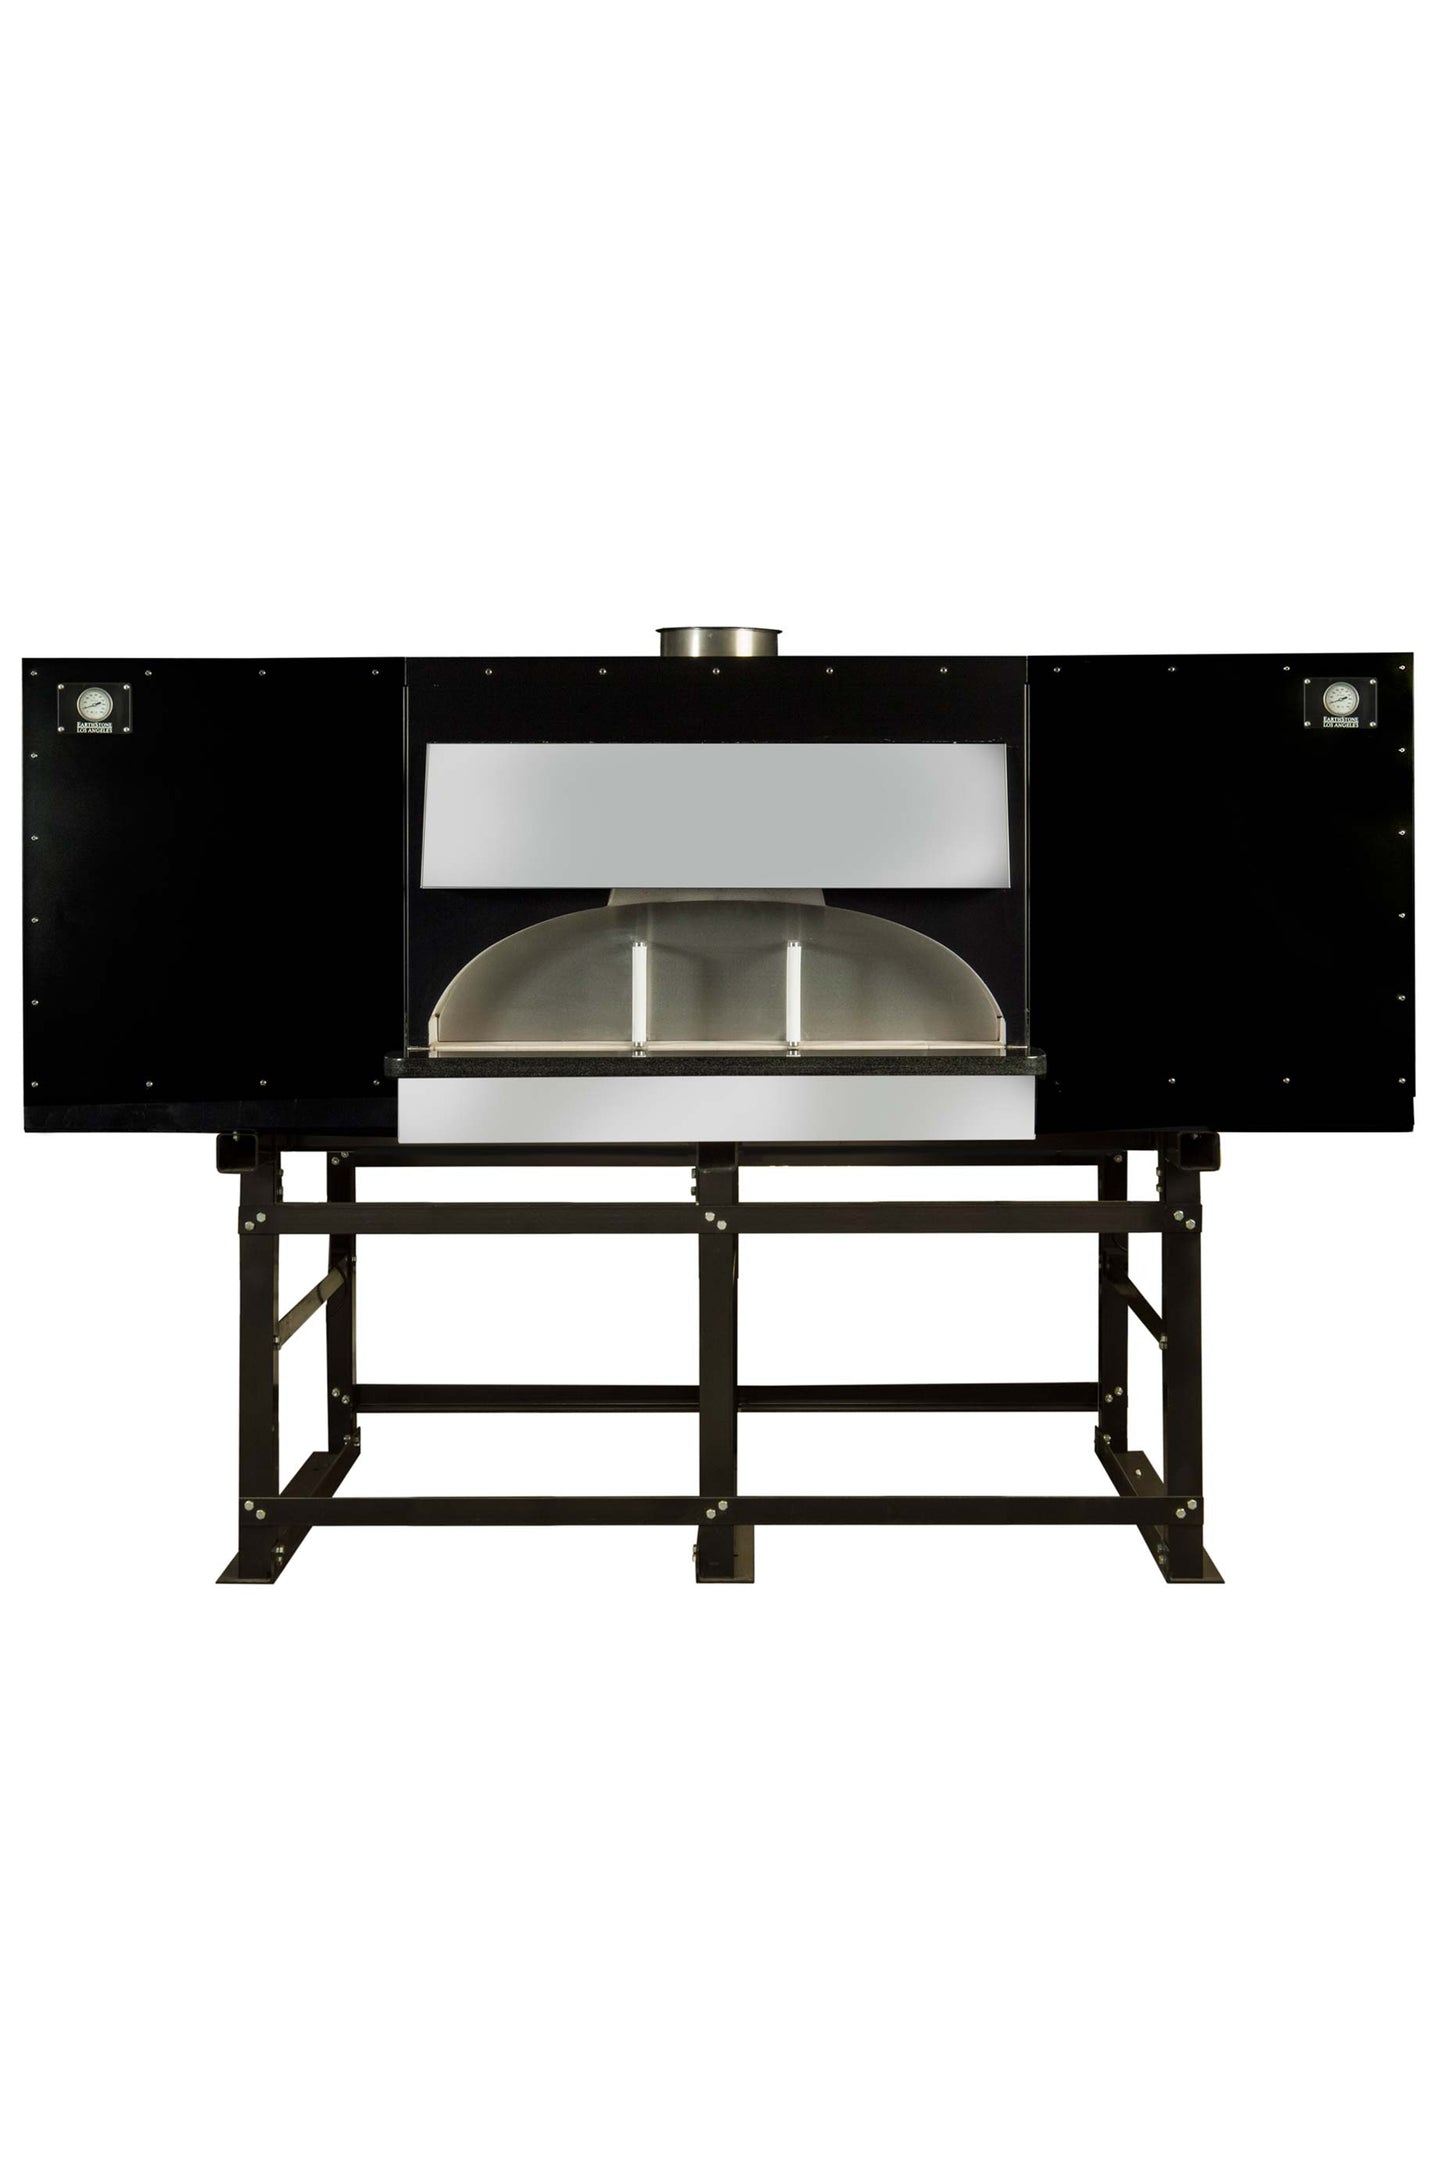 Earthstone 130-Due-PACB Coal Burning Oven